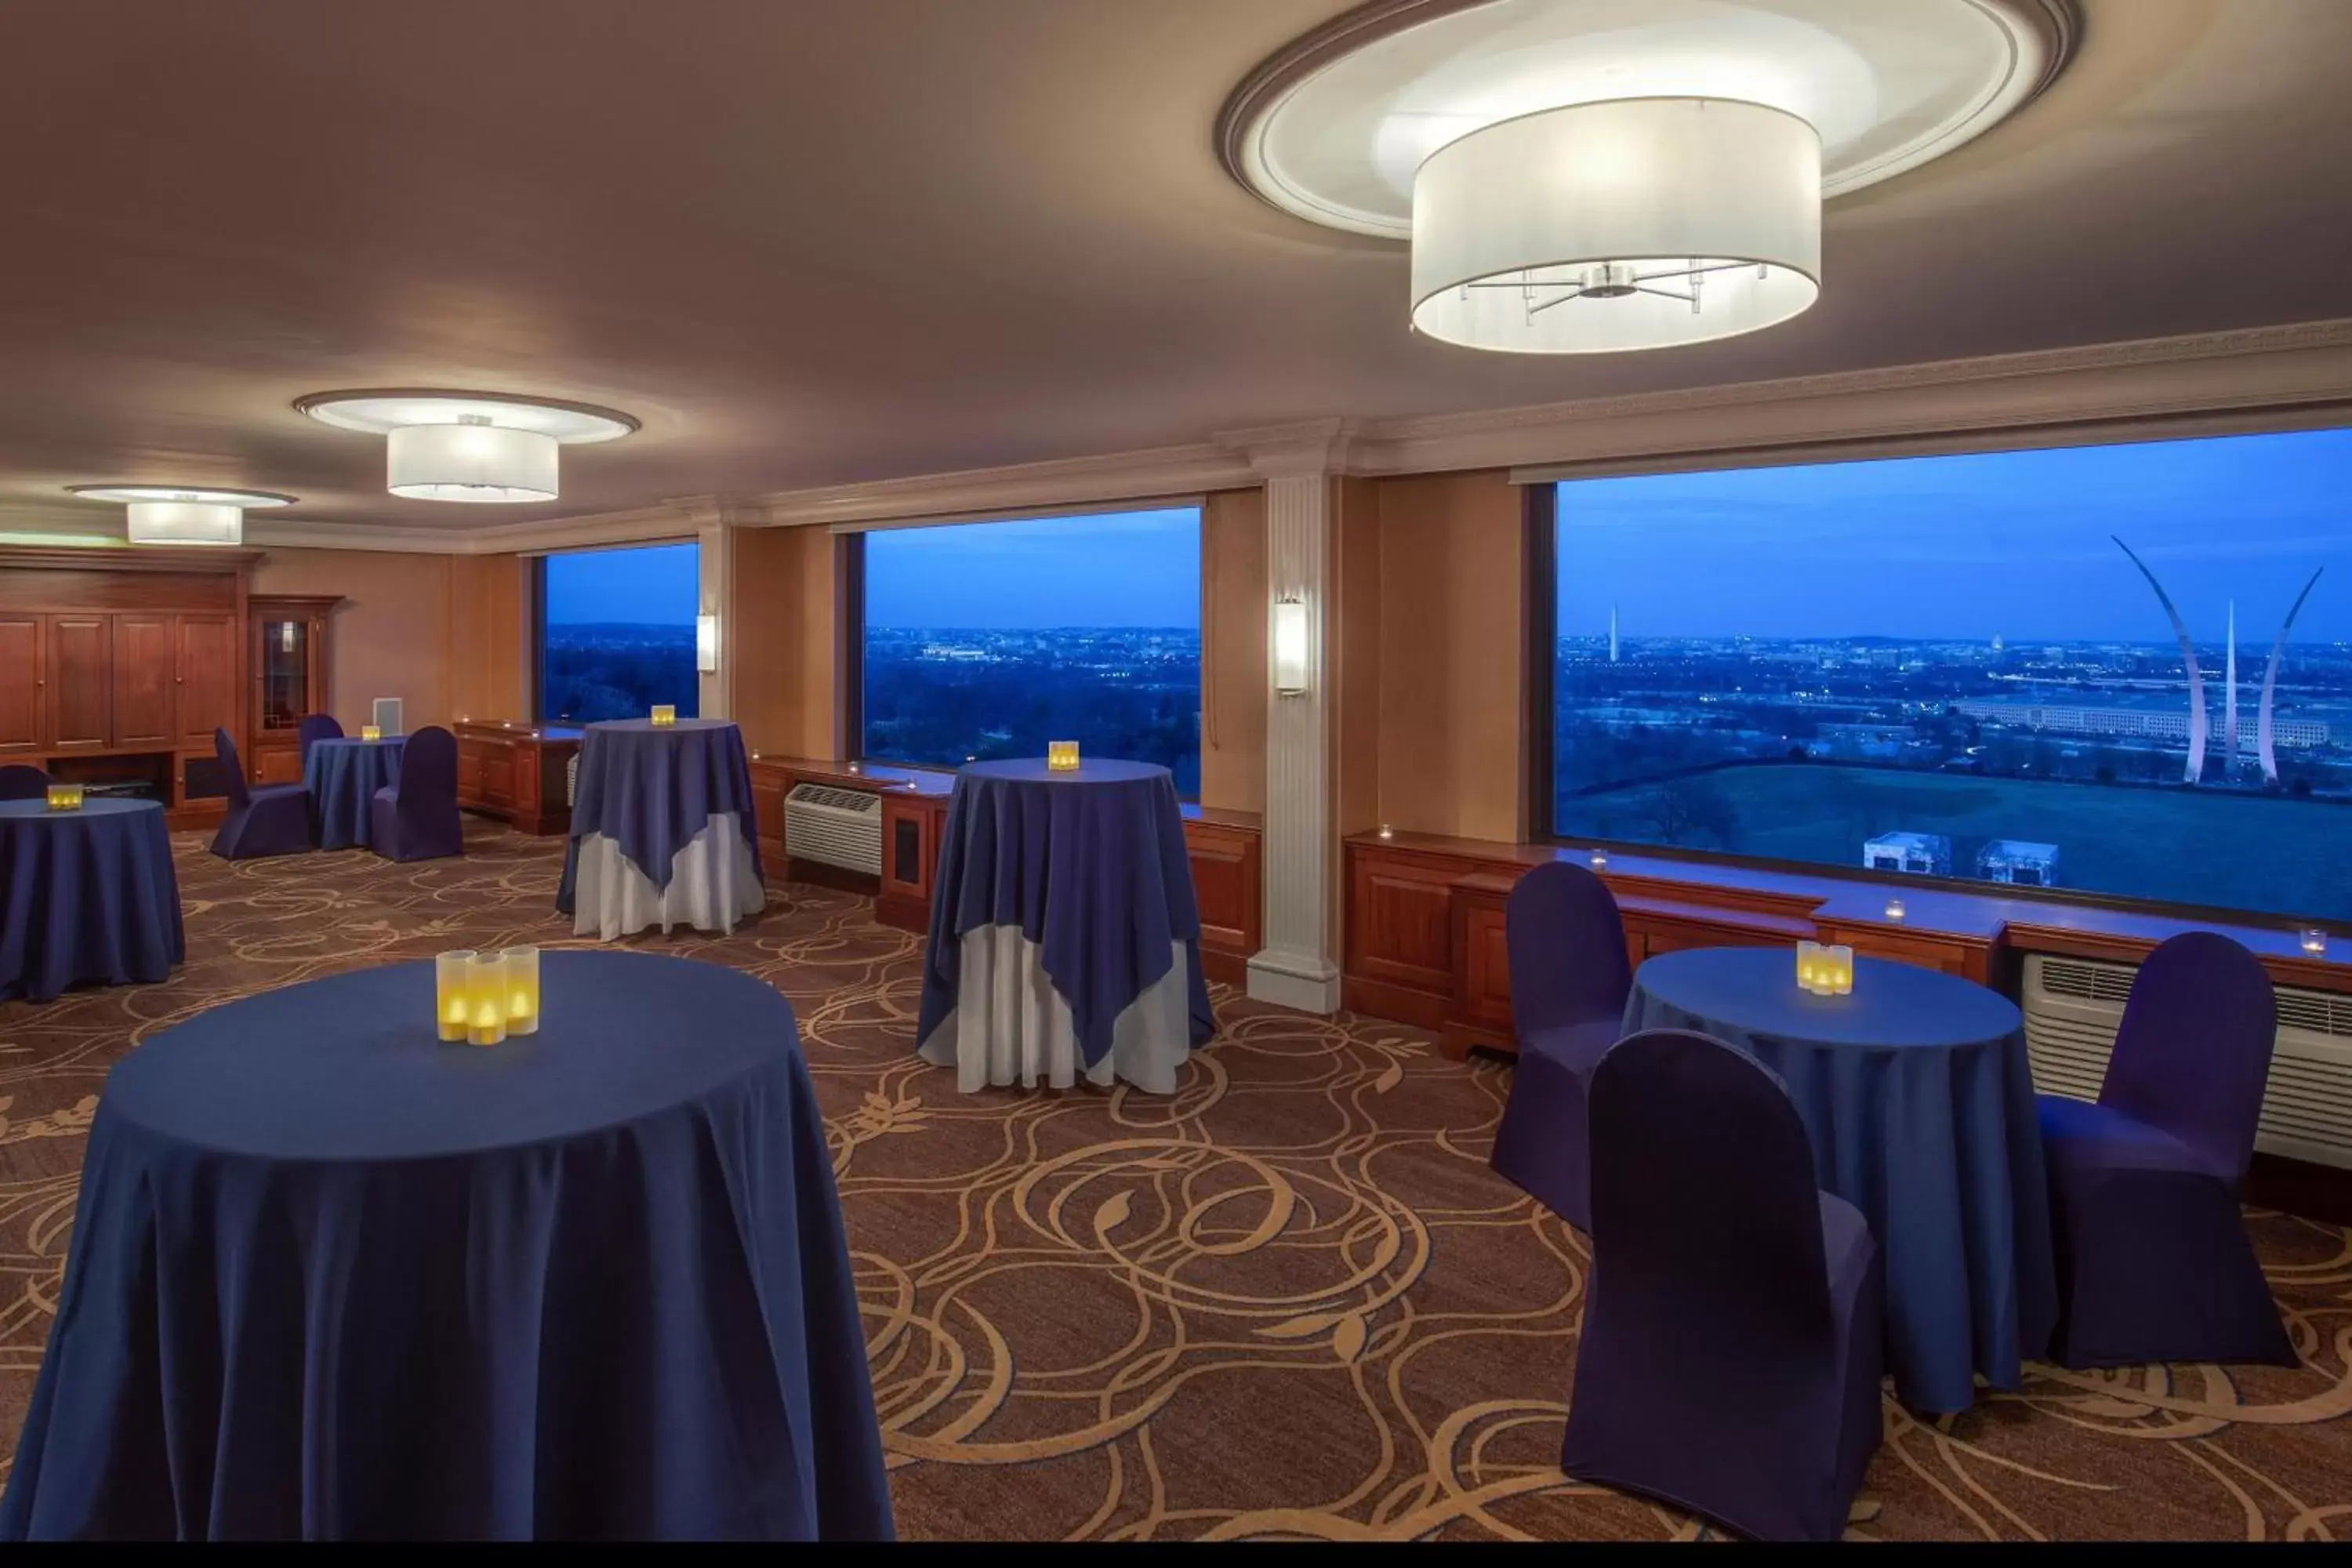 Meeting/conference room, Banquet Facilities in Sheraton Pentagon City